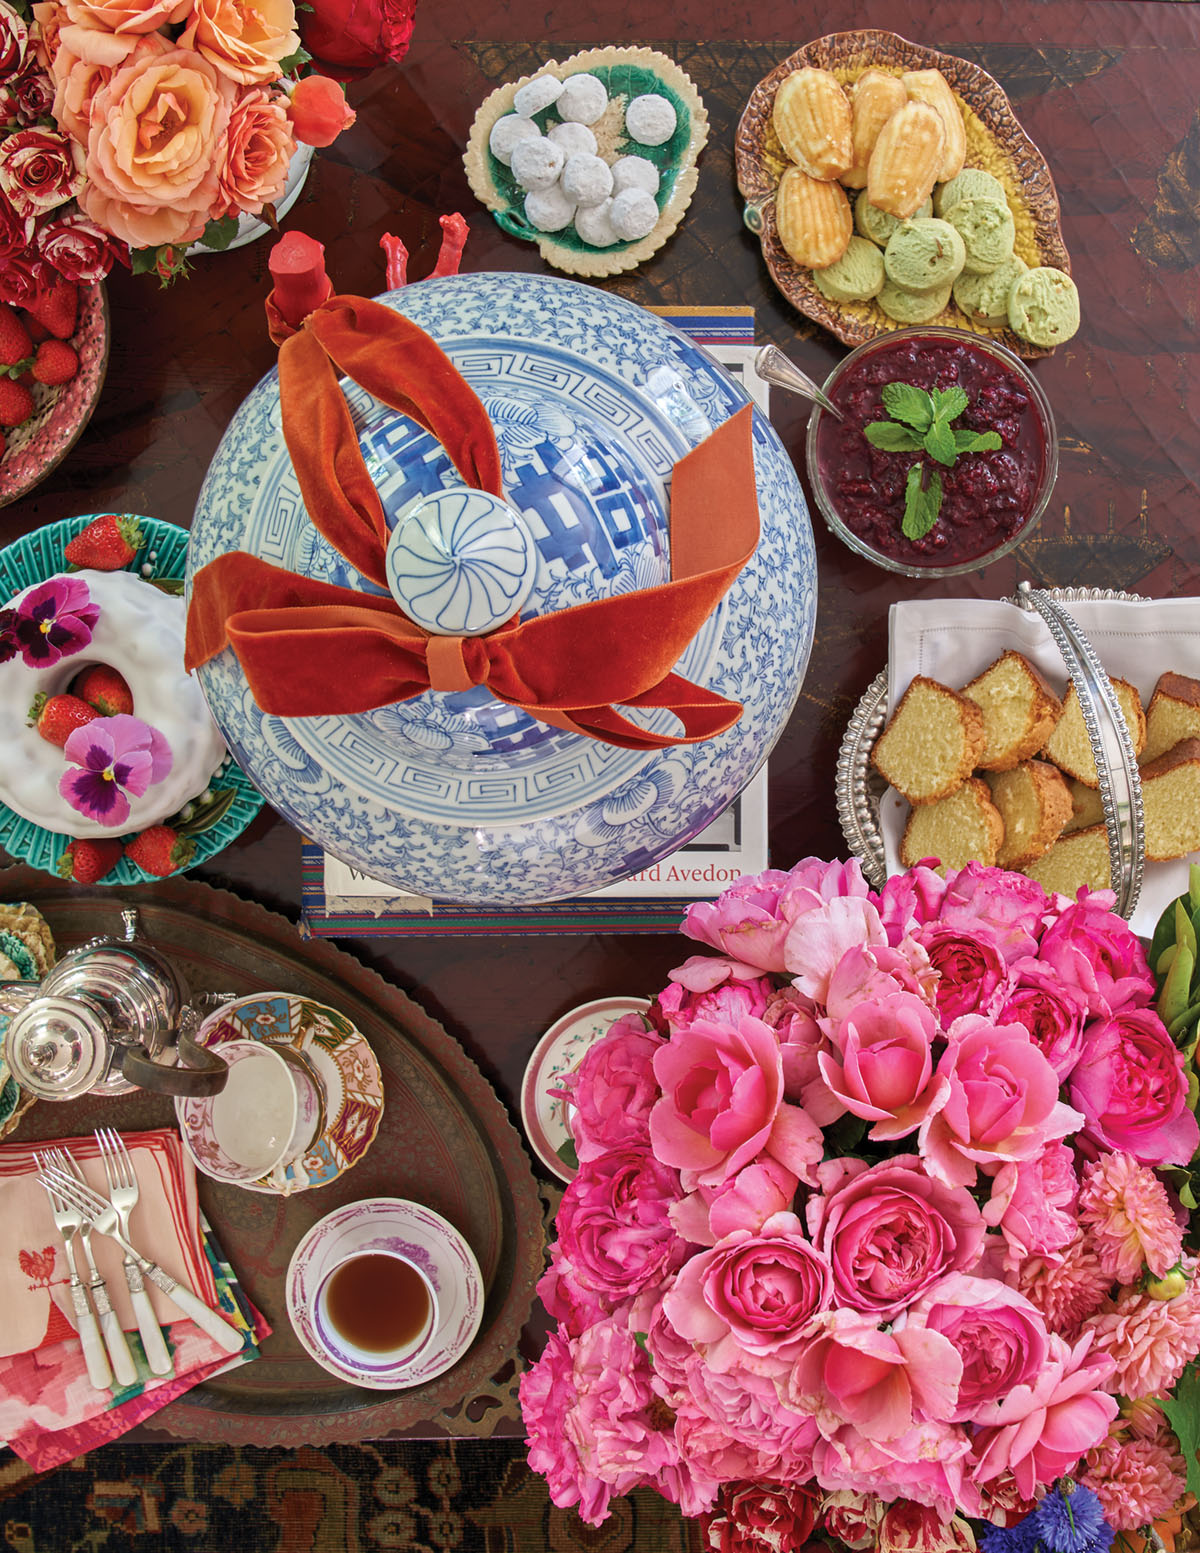 overhead view of the dessert table, including a bouquet of pink roses and a lidded blue-and-white chinoiserie jar